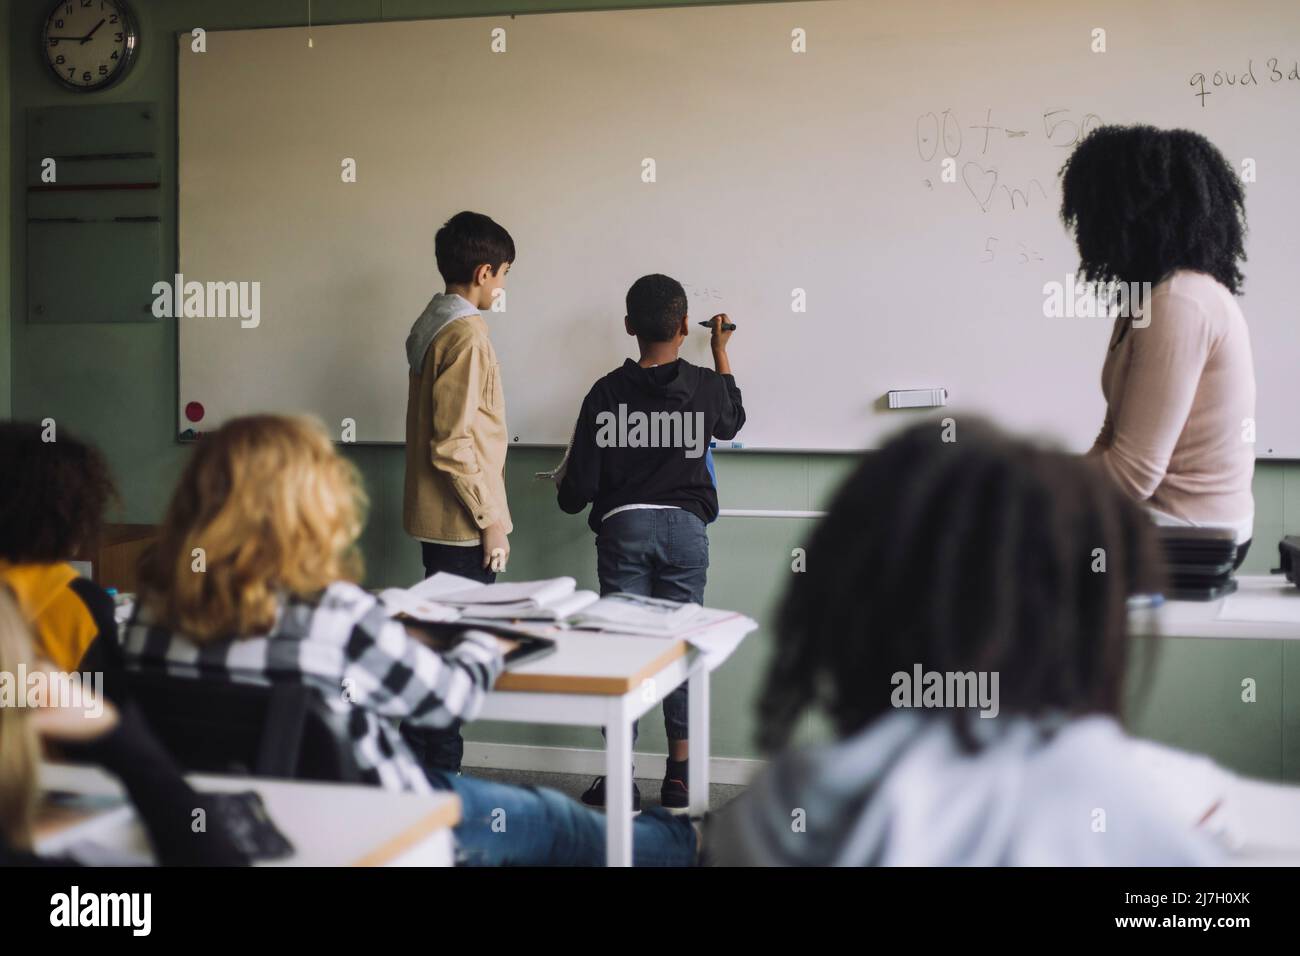 Students solving maths sum on white board in classroom Stock Photo